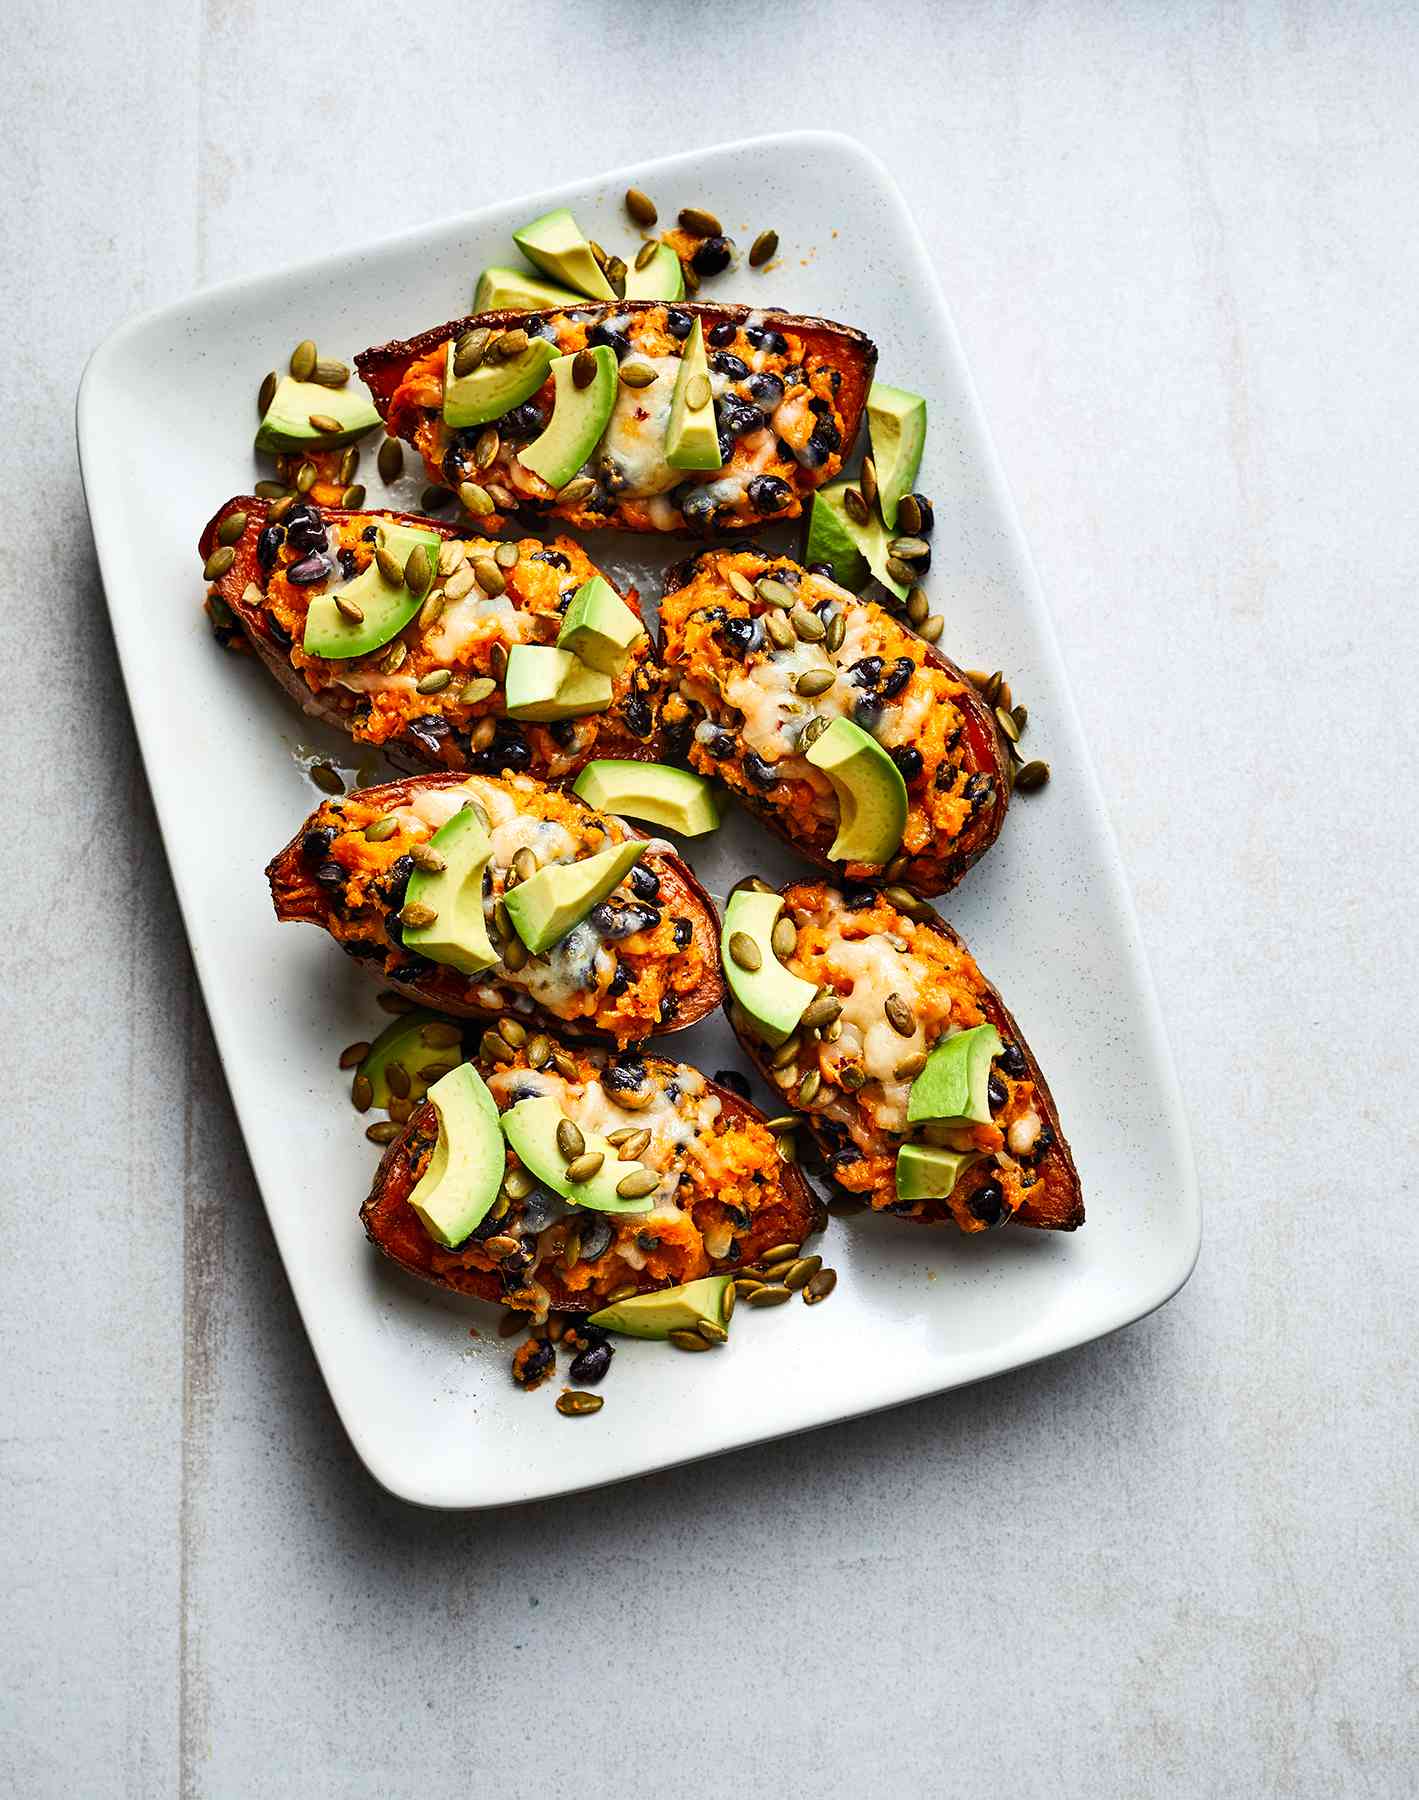 Cheesy Twice-Baked Sweet Potatoes With Black Beans and Avocado